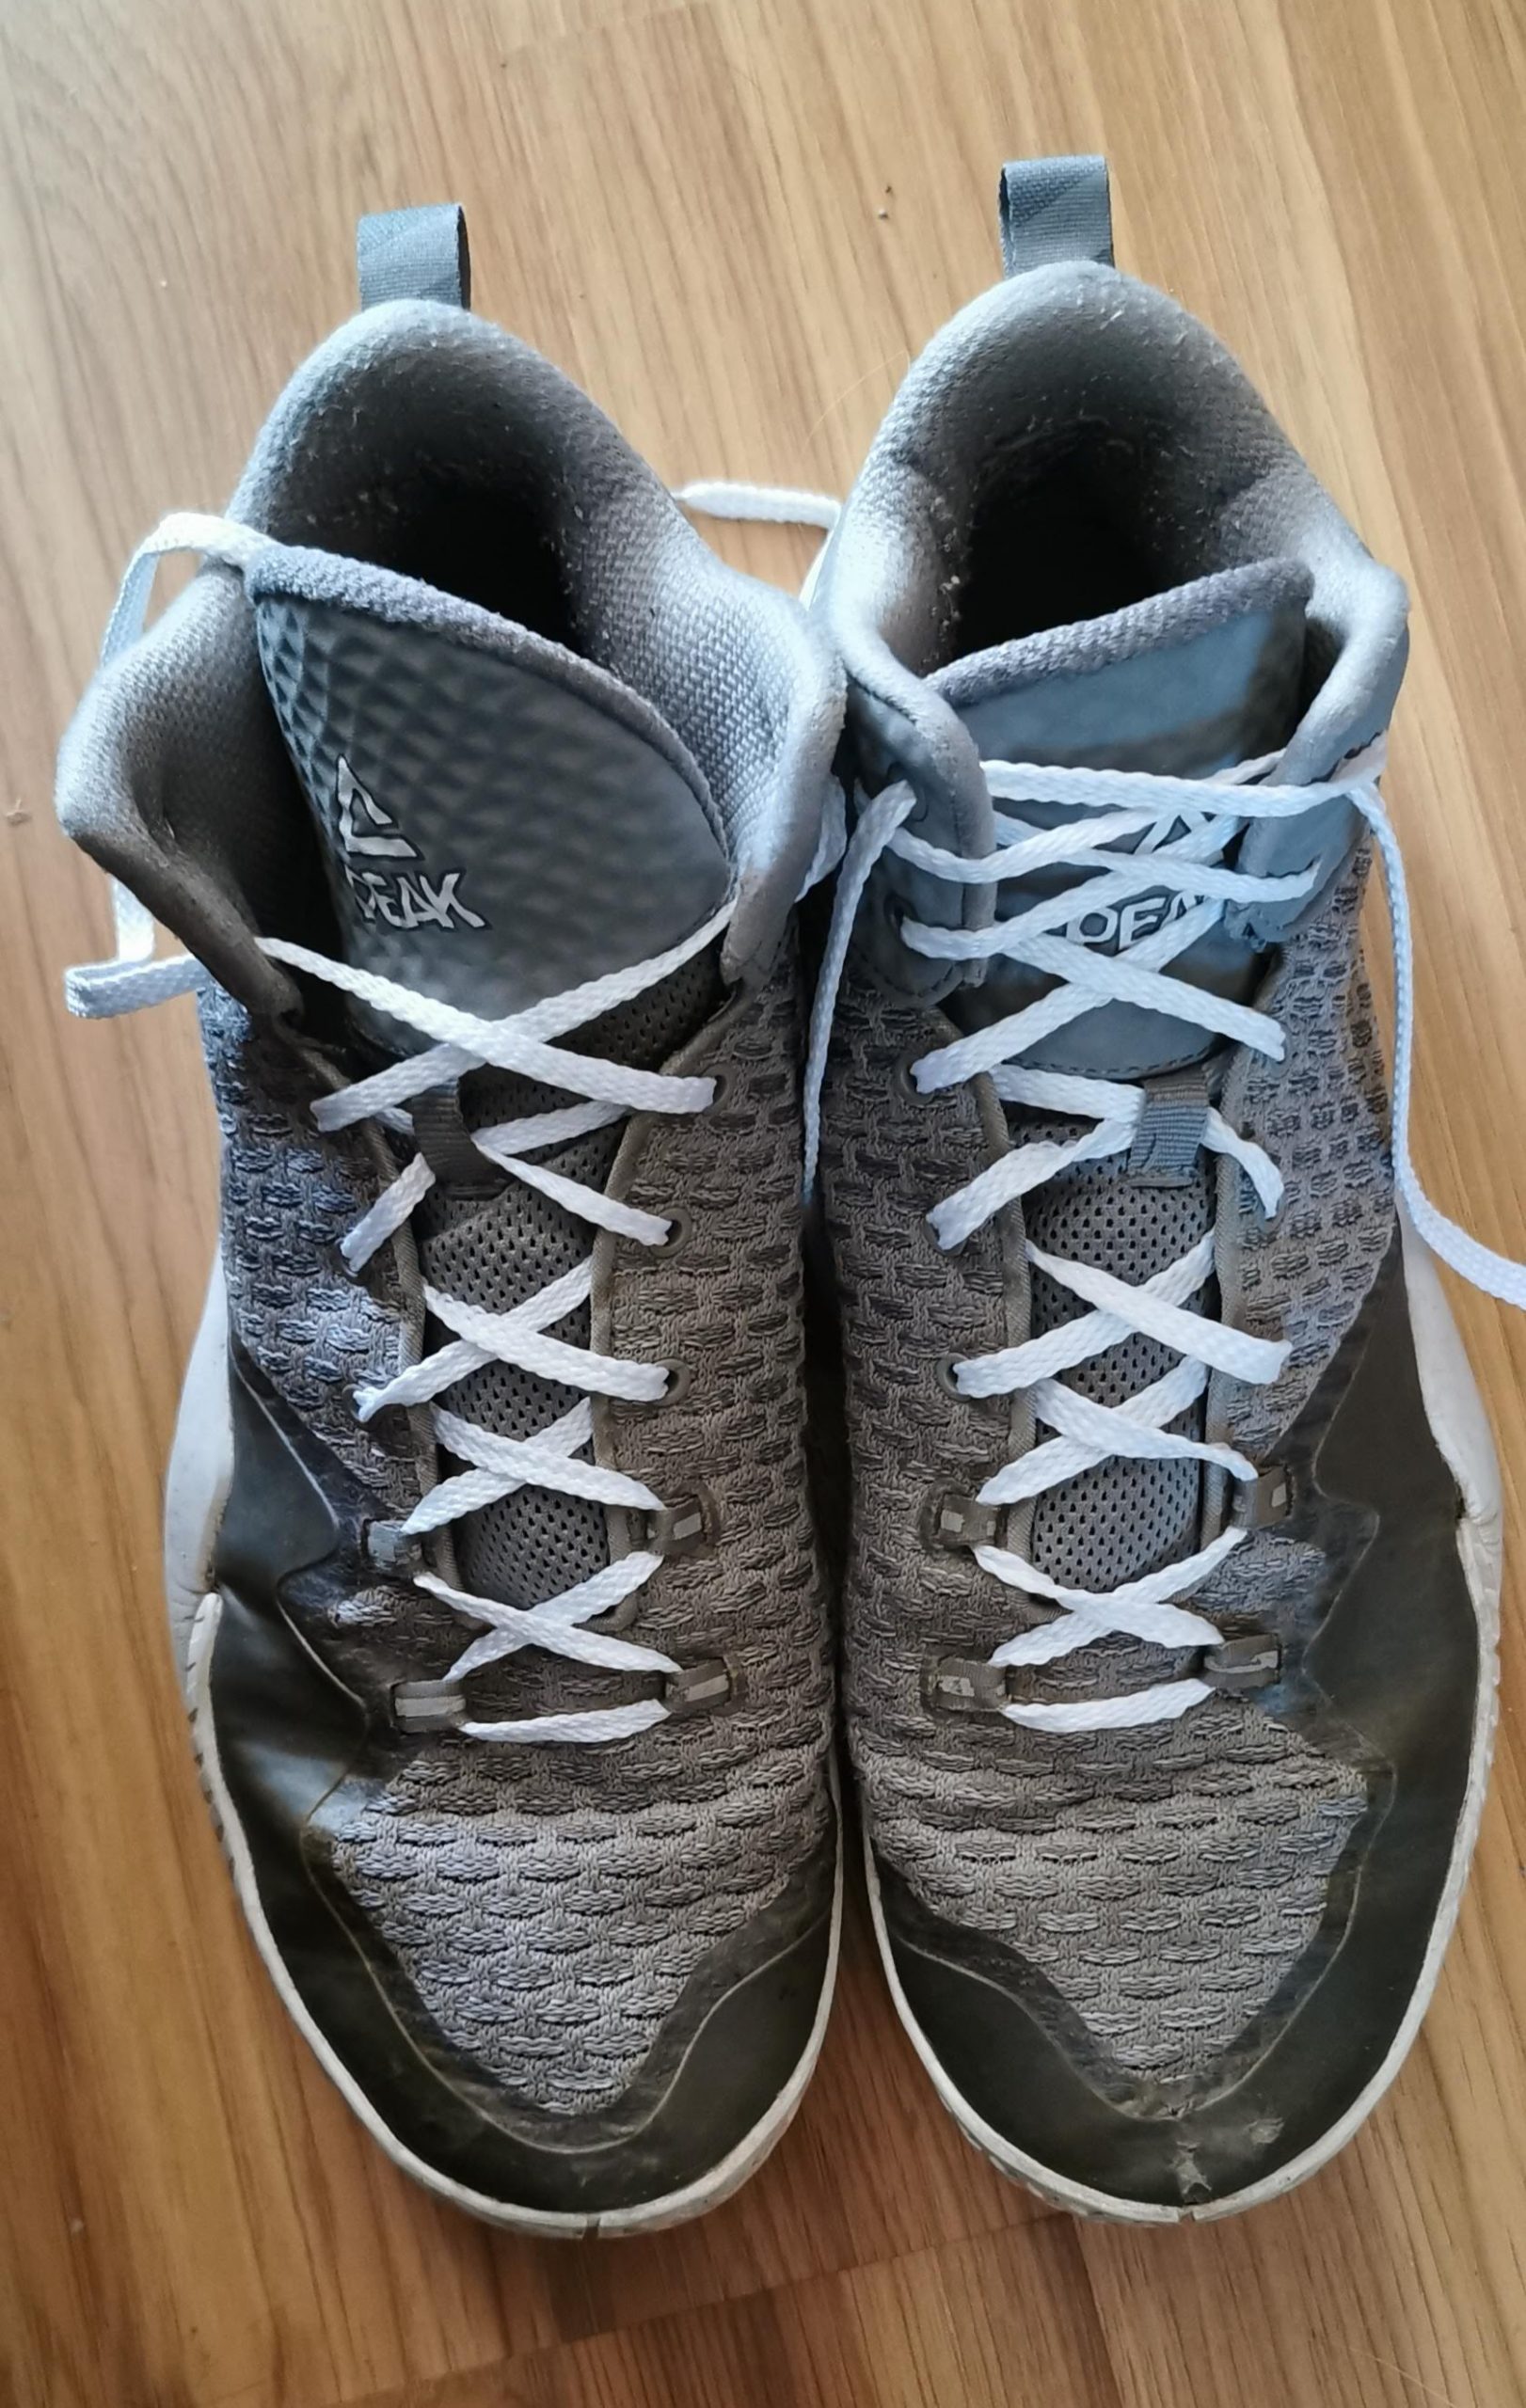 Read more about the article Peak Men’s Basketball Shoes (eBay)